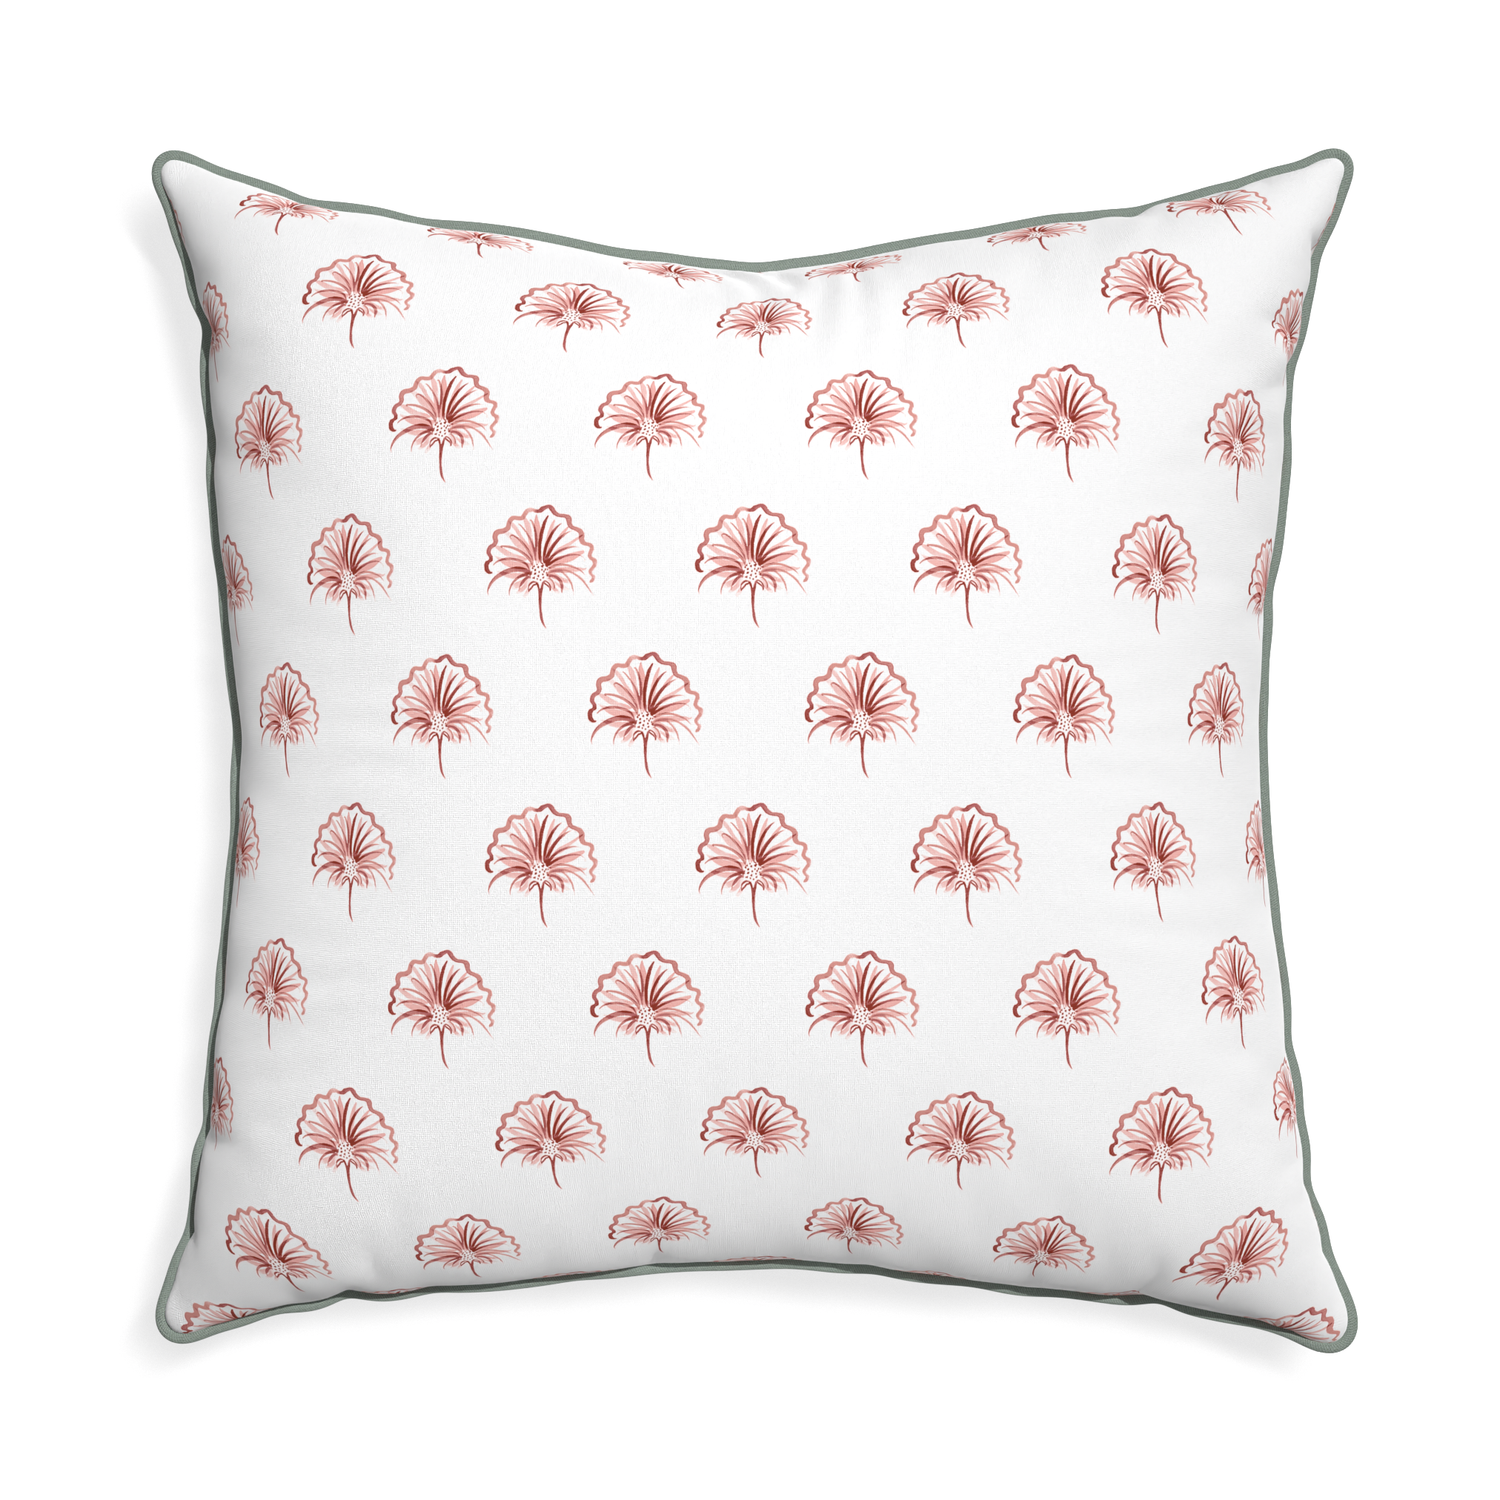 Euro-sham penelope rose custom floral pinkpillow with sage piping on white background